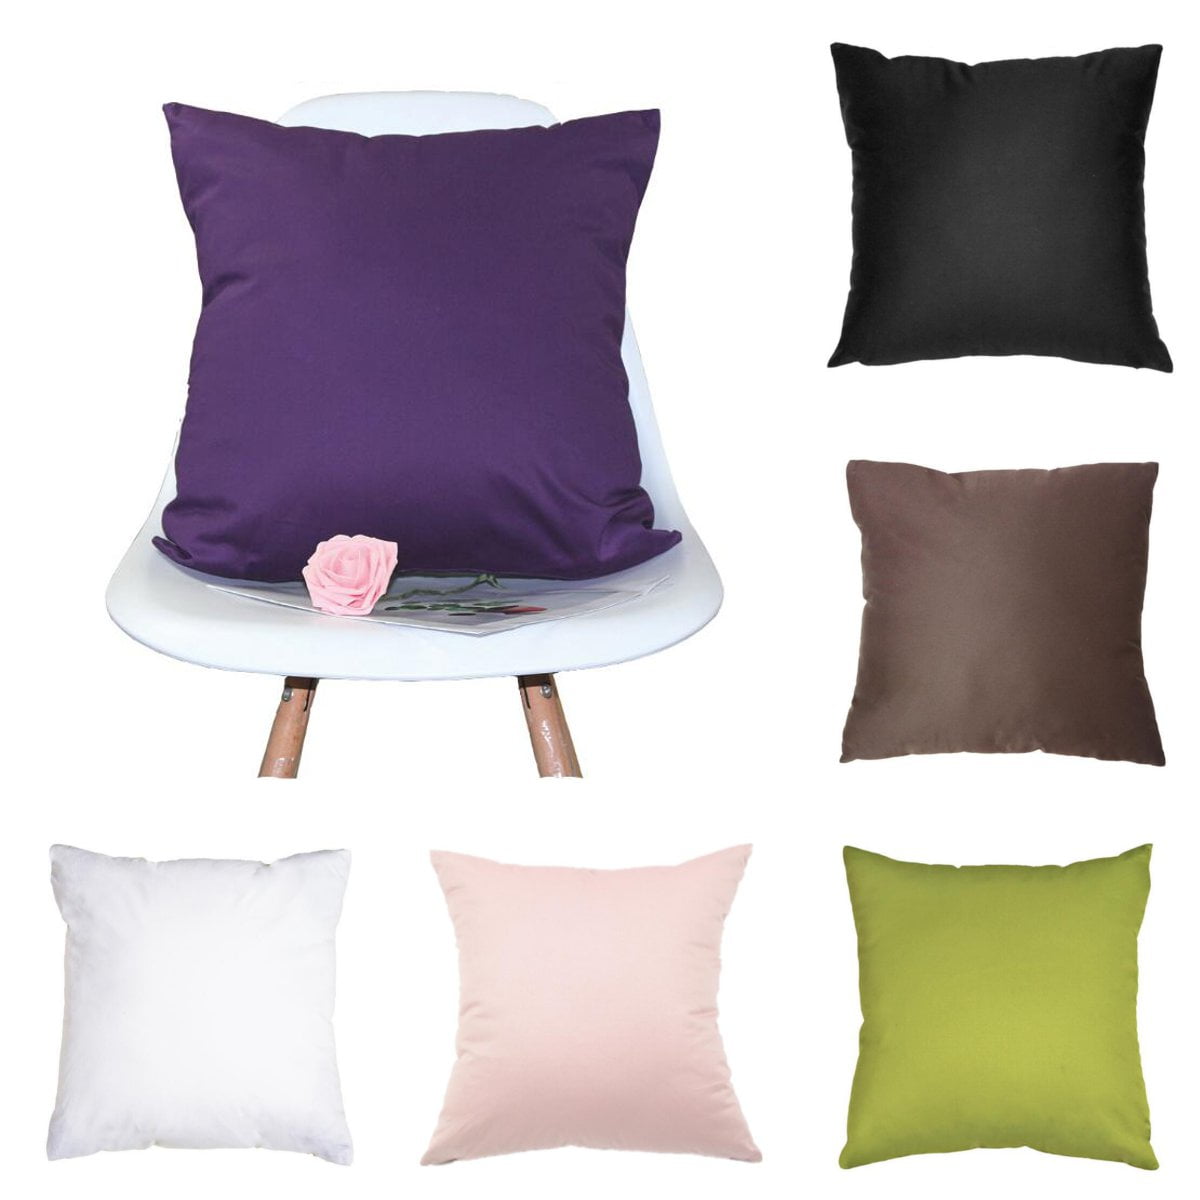 Solid Color Cotton Cushion Cover Throw Pillow Case Sofa Bed Couch 18x18inch 